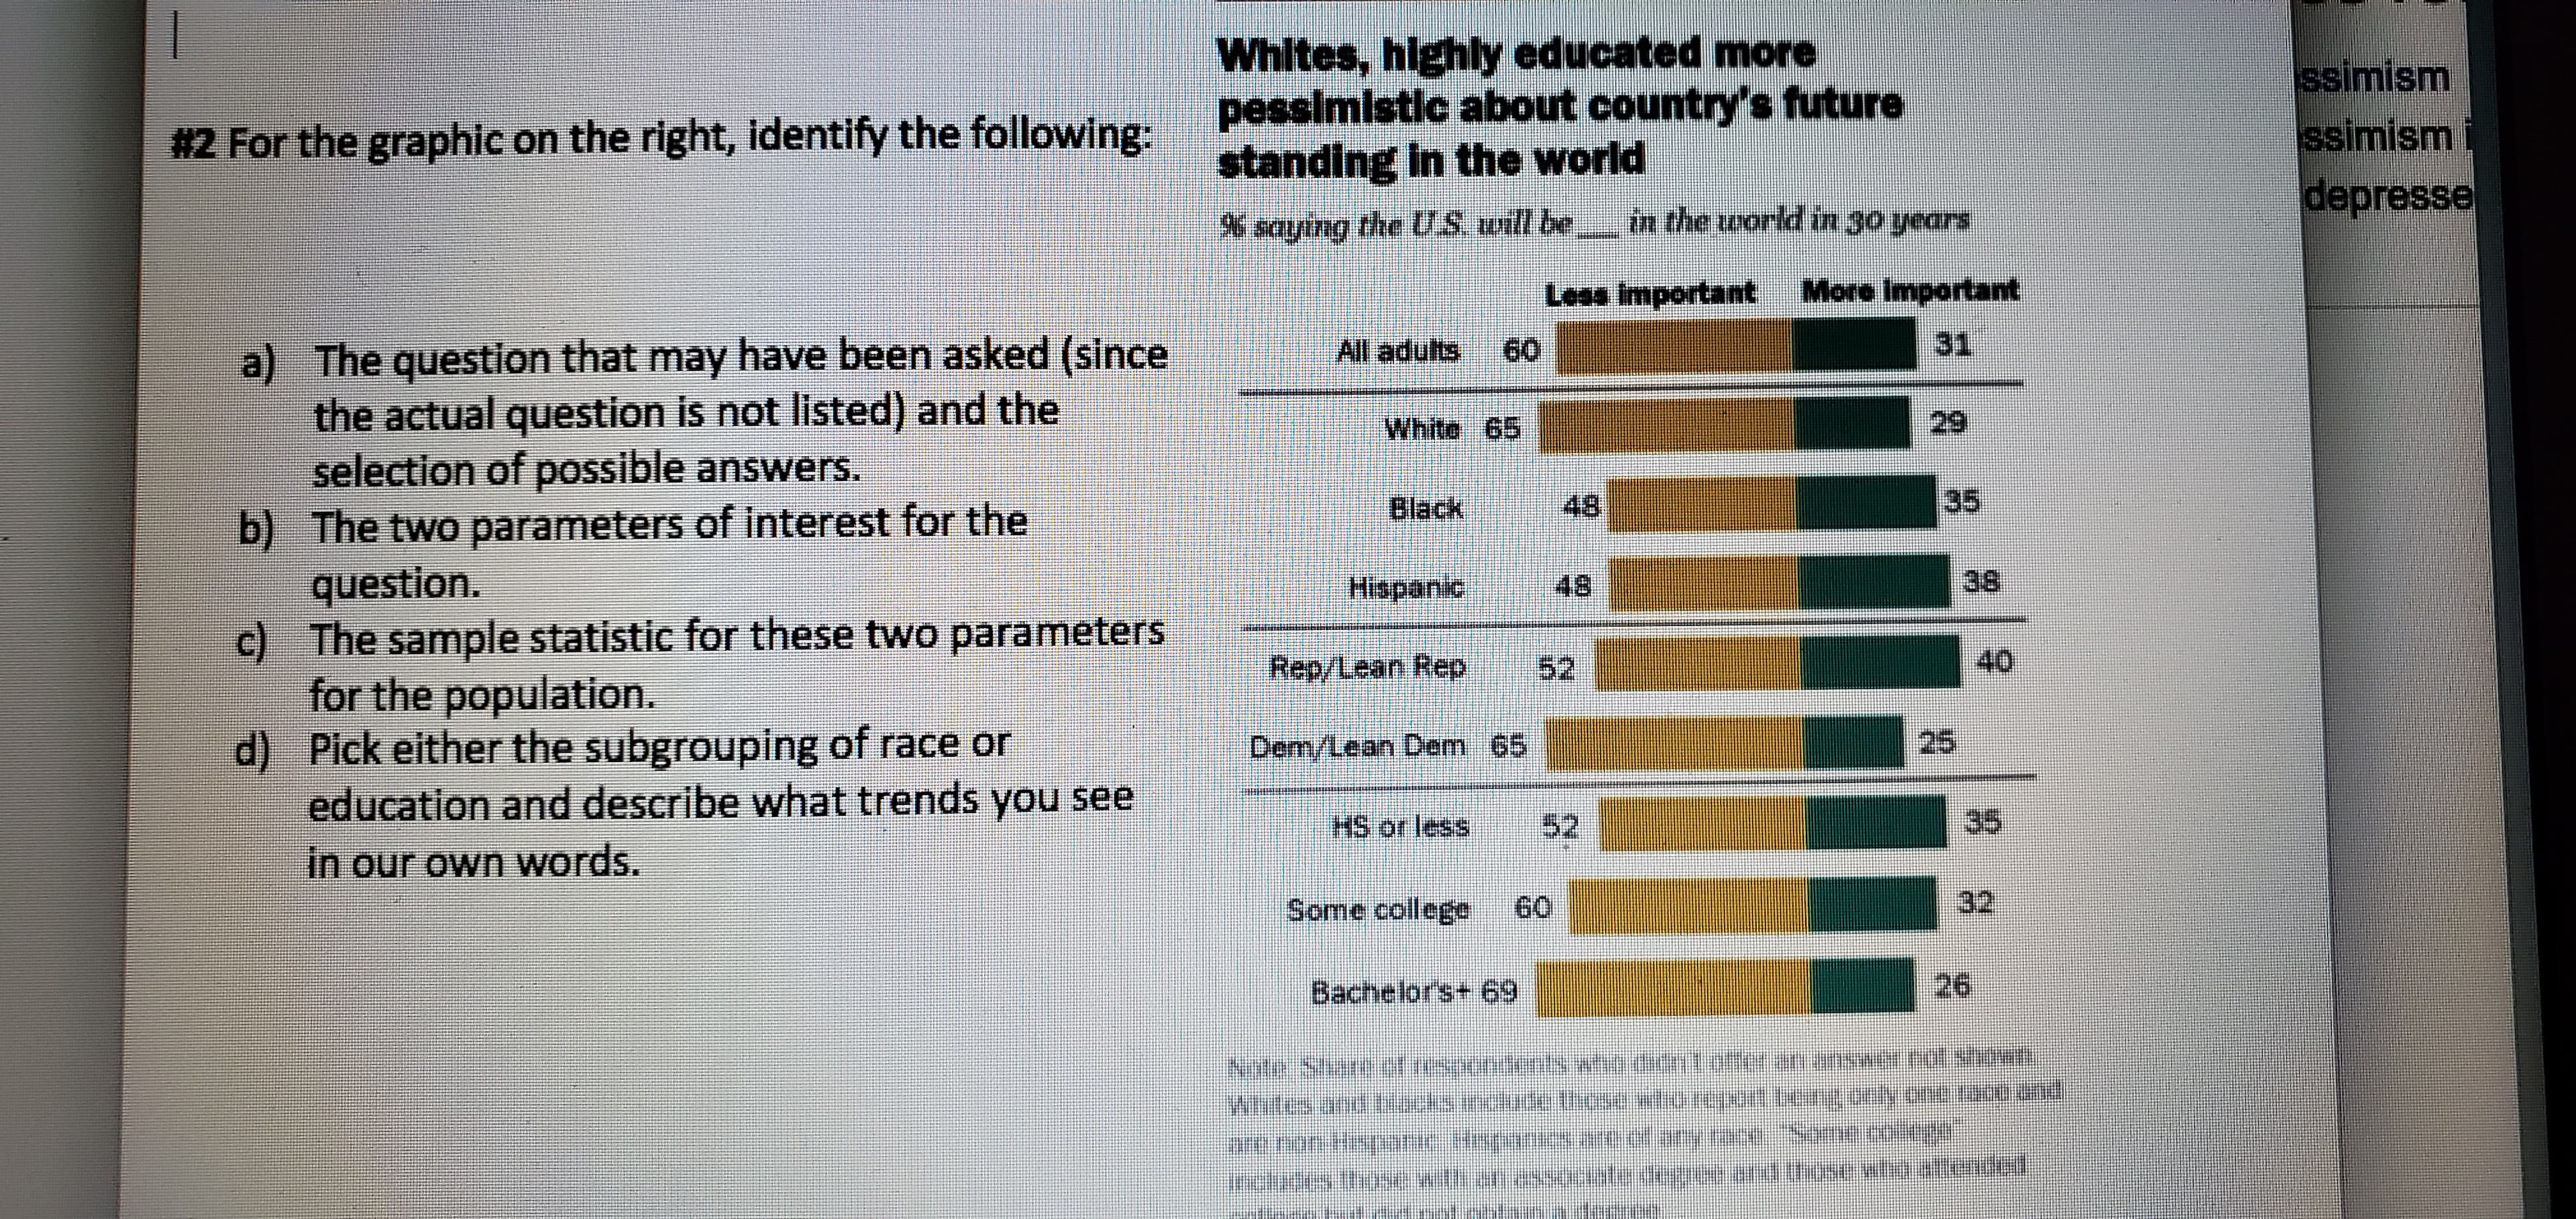 Whites, highly educated more
ssimism
ssimismi
pessimlstic about country's future
standing In the world
#2 For the graphic on the right, identify the following:
depresse
in the unorld in 30 years
அளபமாg the US. யrlb®
More important
Less important
31
a) The question that may have been asked (since
the actual question is not listed) and the
selection of possible answers.
b) The two parameters of interest for the
question.
c) The sample statistic for these two parameters
for the population.
d) Pick either the subgrouping of race or
education and describe what trends you see
मT adulte
60
White 65
35
48
Black
38
48
Hispanic
40
Rep/Lean Rep
52
25
Dem/Lean Dem 65
35
52
TtS of Iలss
In our own words.
32
60
Some college
26
Bachelorst 69
